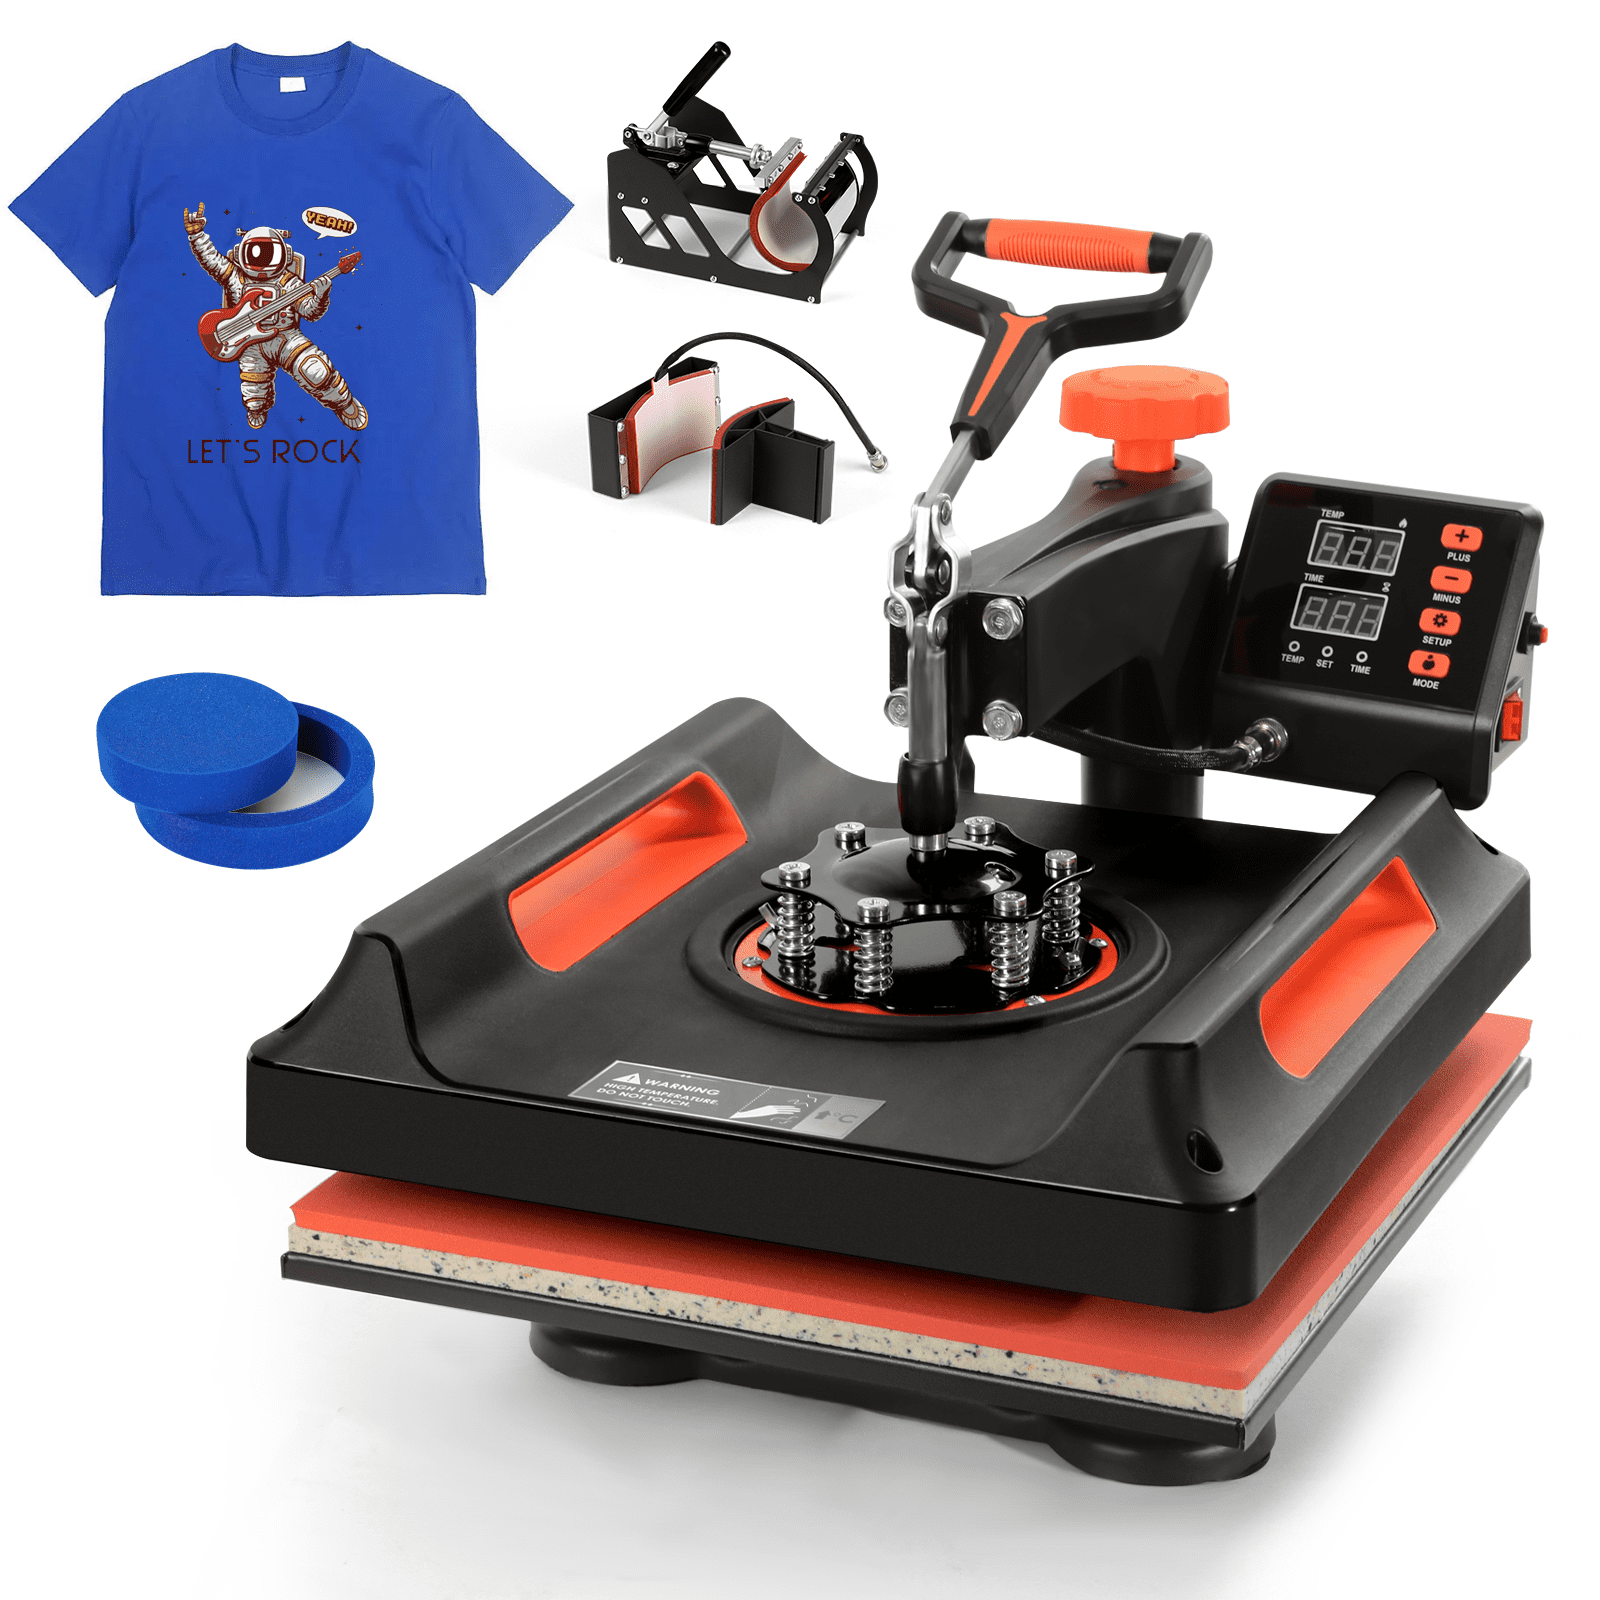 Red 8-in-1 Heat Press Machine, 15 x 15 Inches Sublimation Transfer Printer,  Digital Precise LCD Control Printing, 360 Swing Away Vinyl Transfer